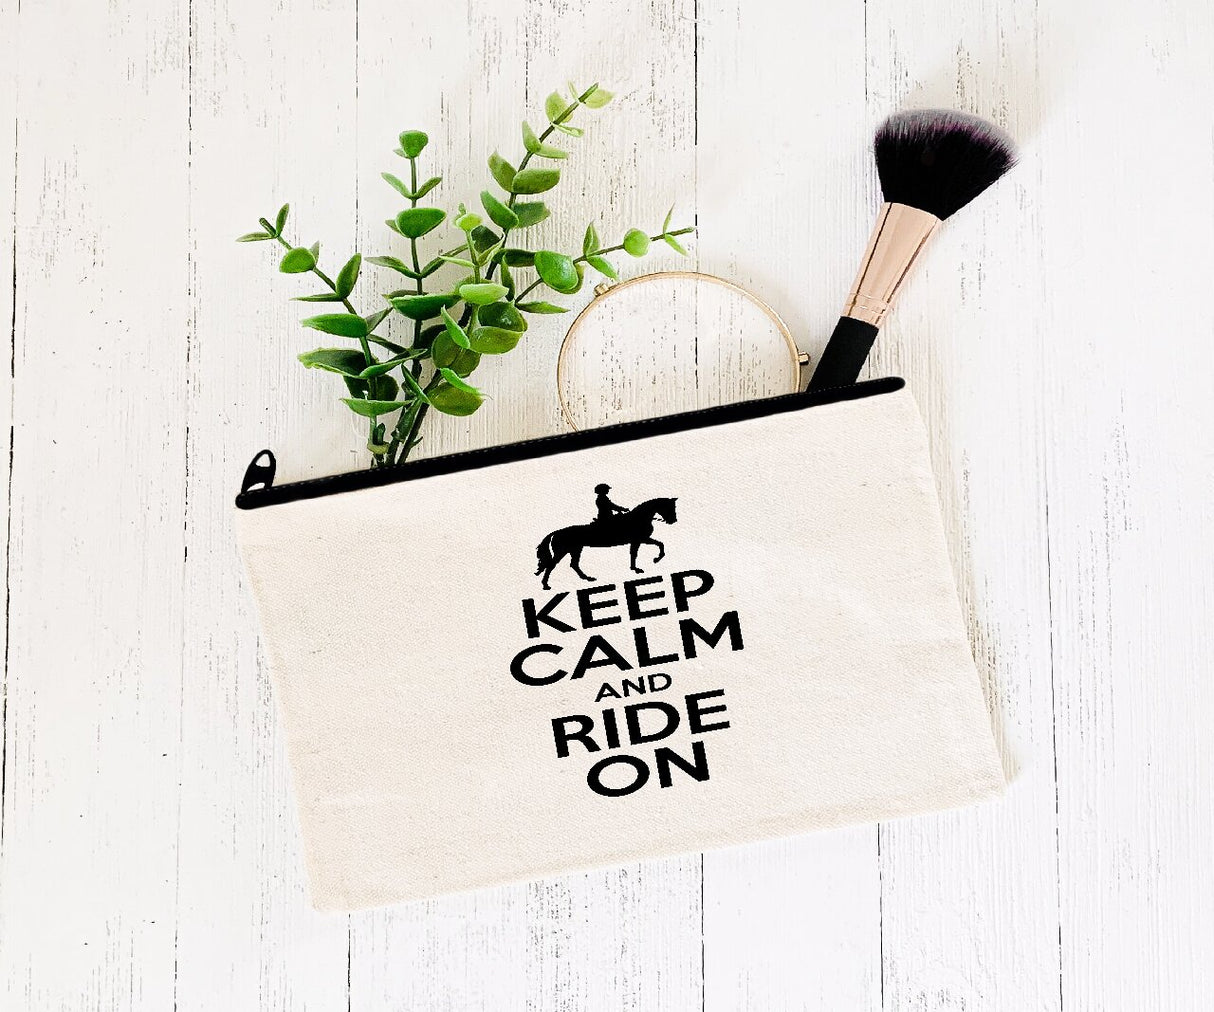 Keep Calm & Ride On - Zipper Bags for Cosmetics, Pencils or Show Cash